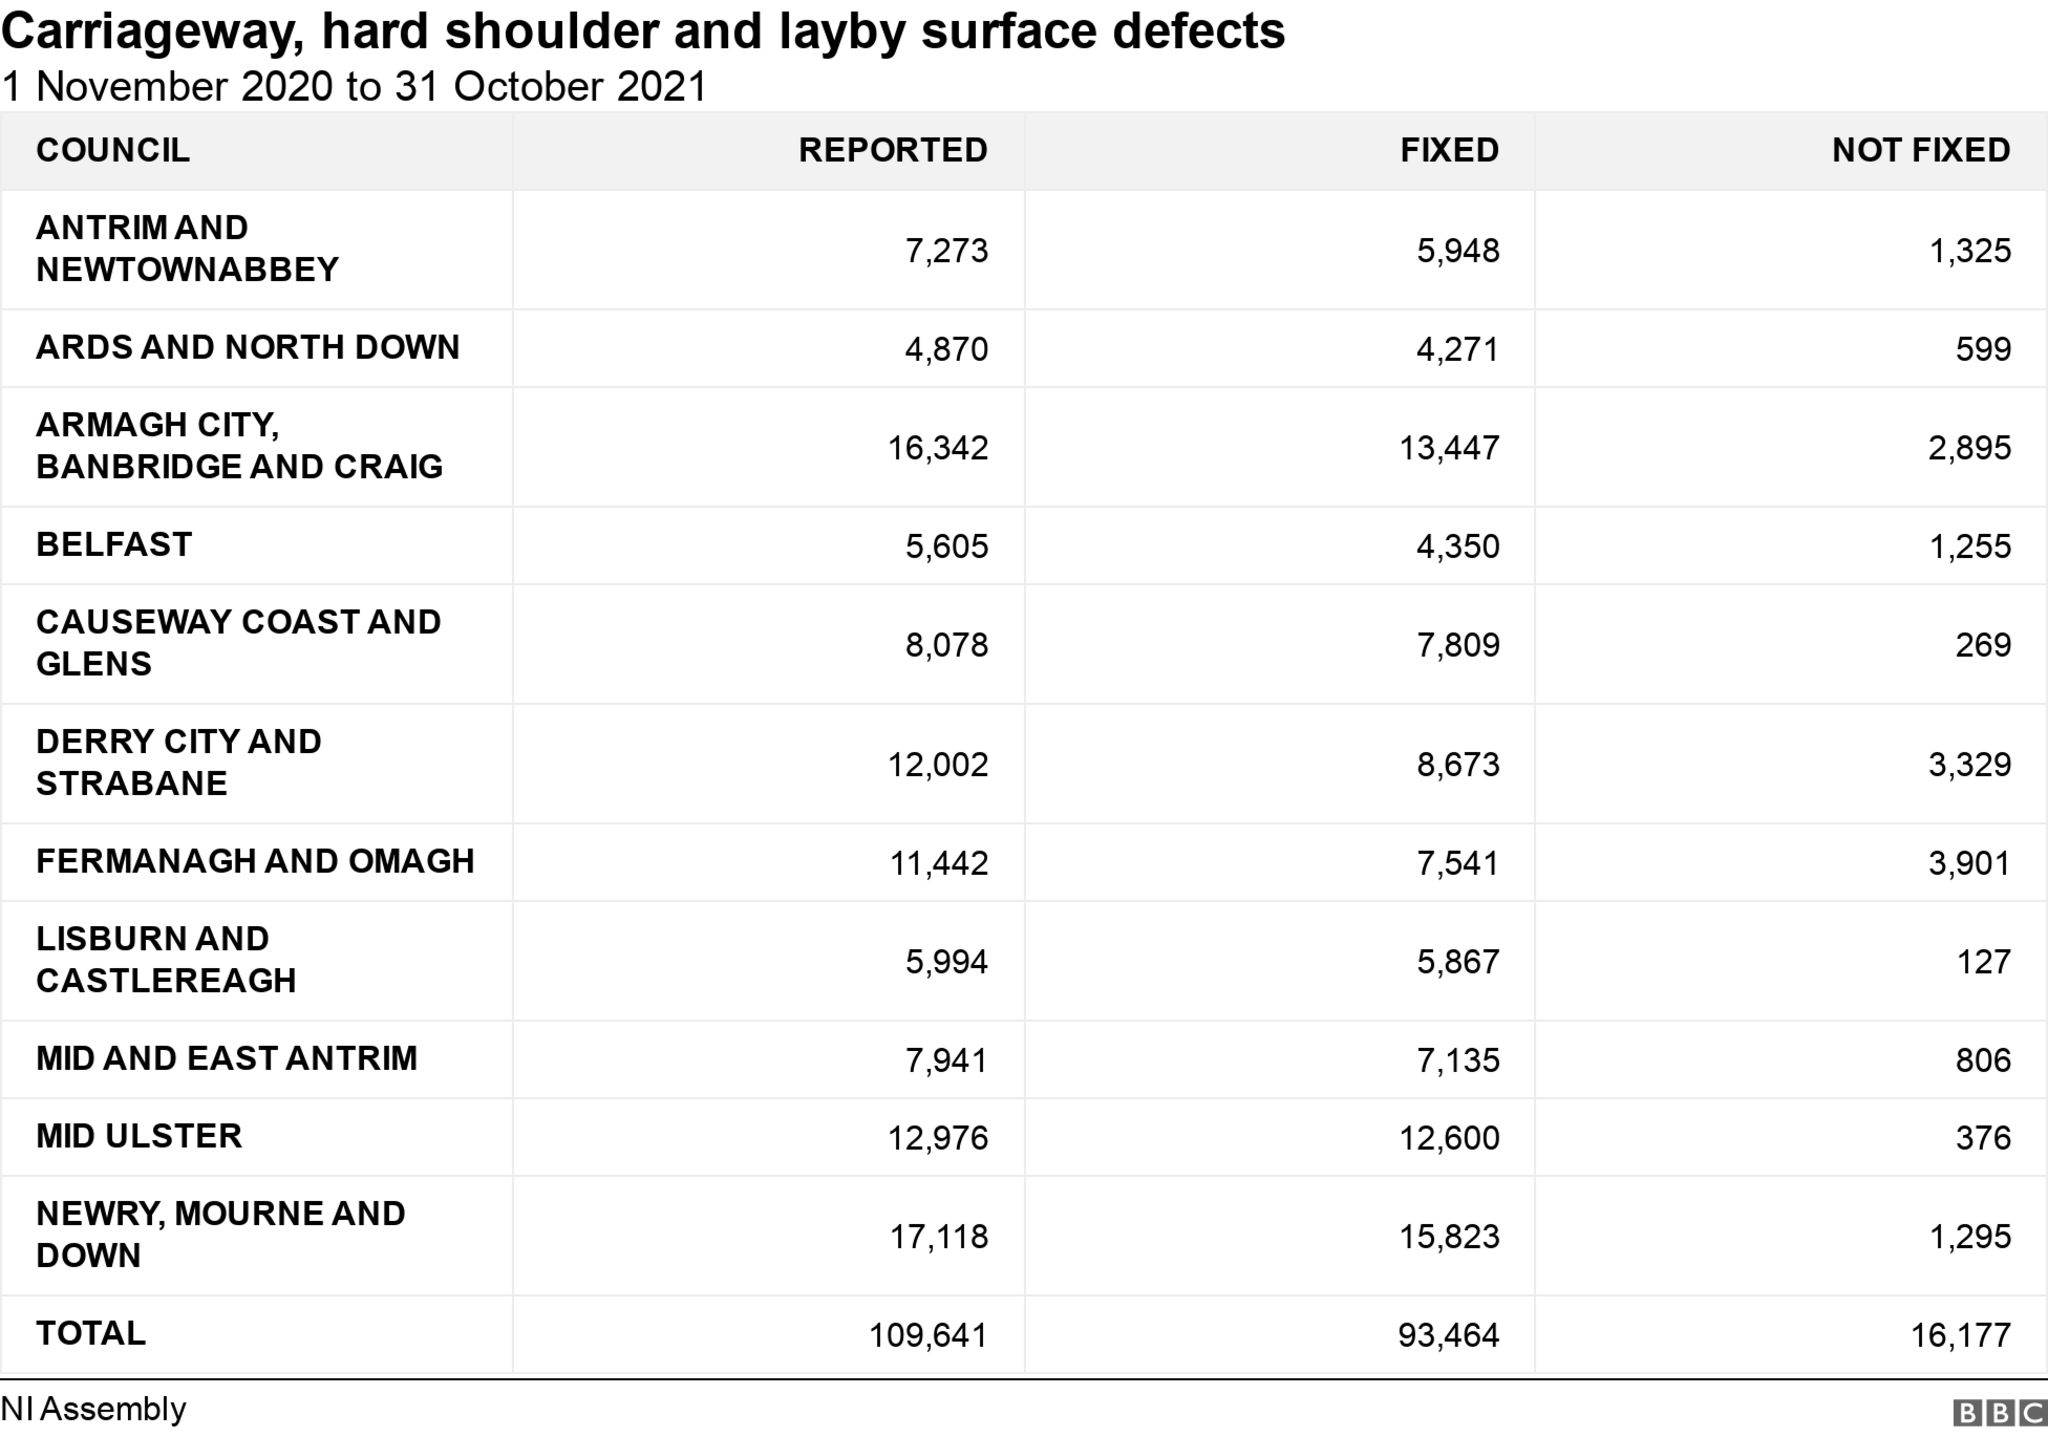 The following table provides details of the number of carriageway, hard shoulder and layby surface defects (which includes potholes, cracking, depressions etc.)